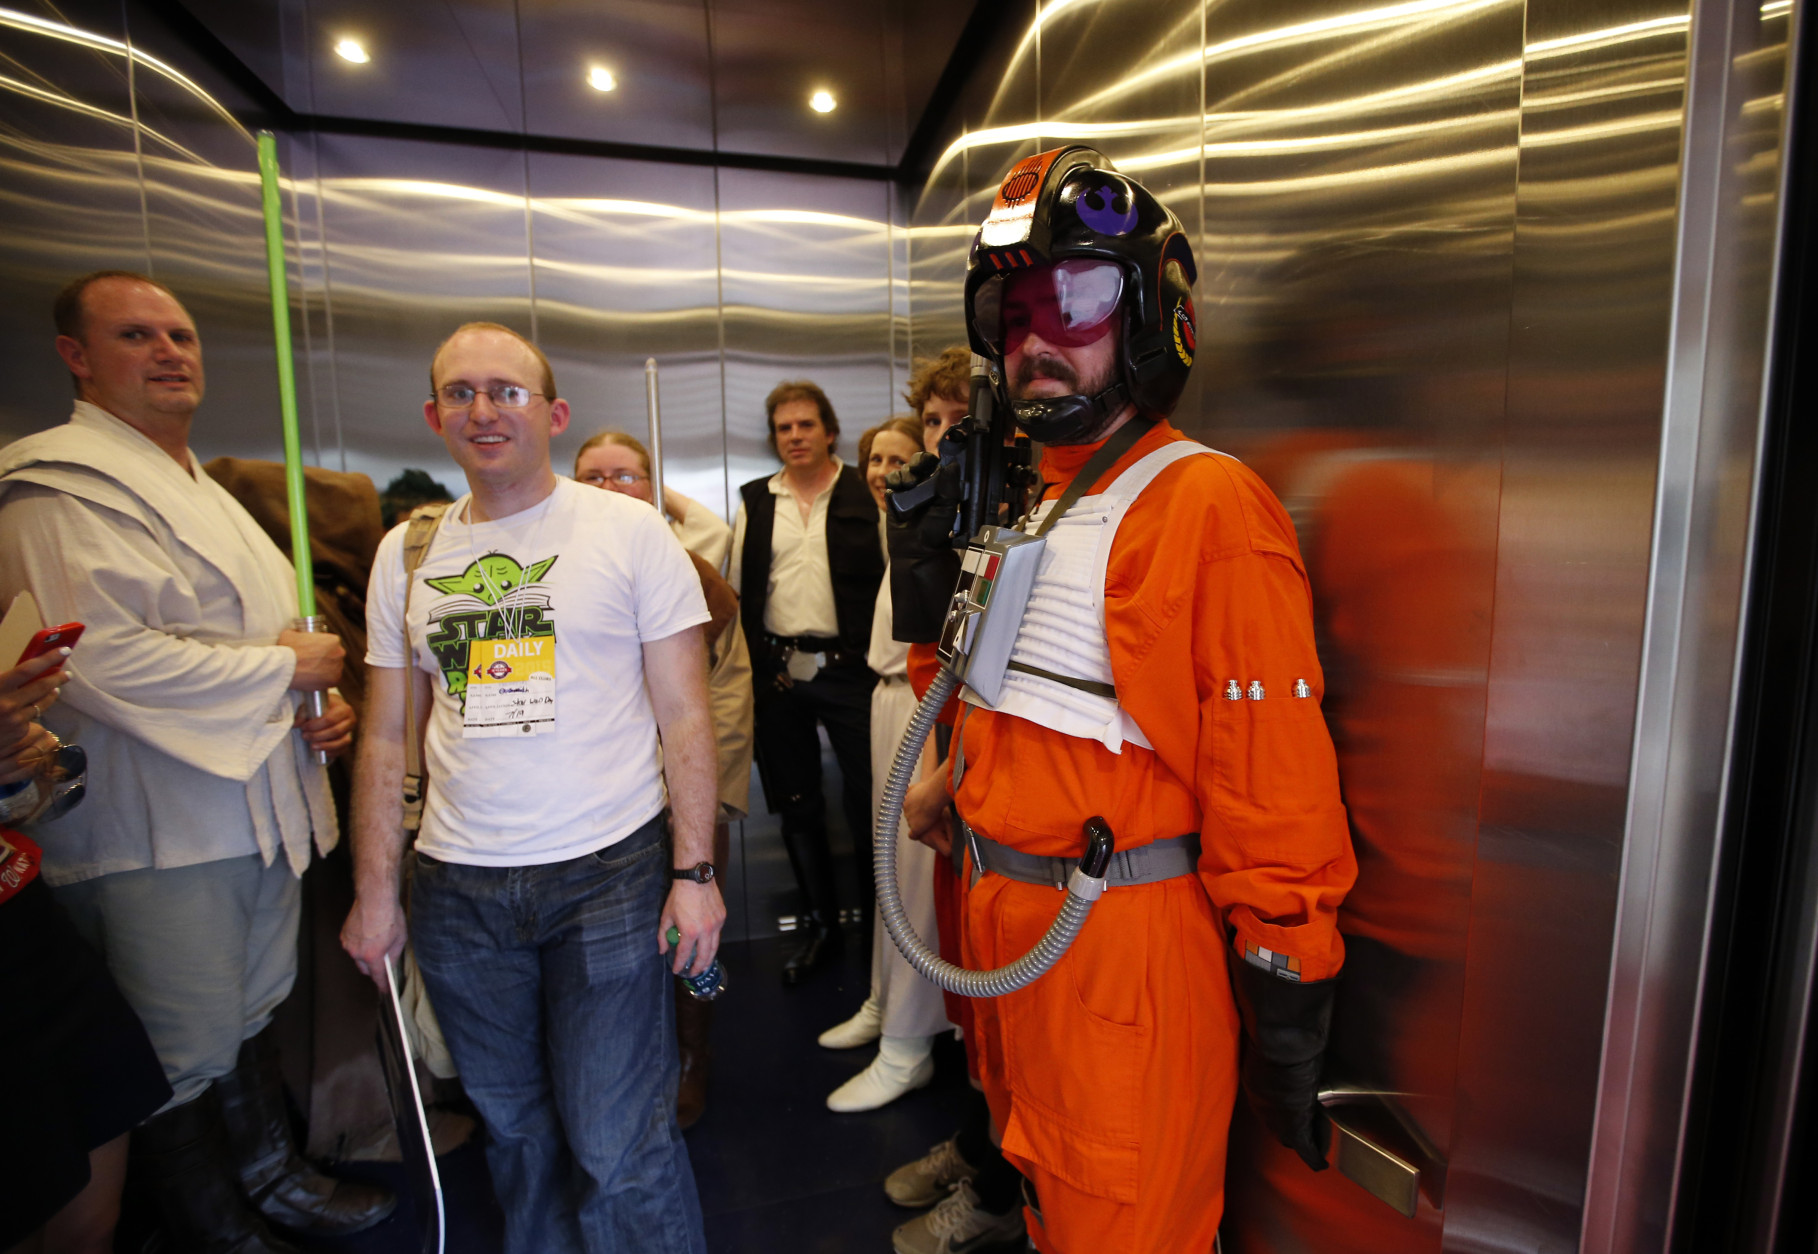 People dressed as Star Wars characters crowd in an elevator to take a break on Star Wars day before a baseball game between the Washington Nationals and the Los Angeles Dodgers at Nationals Park, Sunday, July 19, 2015, in Washington. (AP Photo/Alex Brandon)